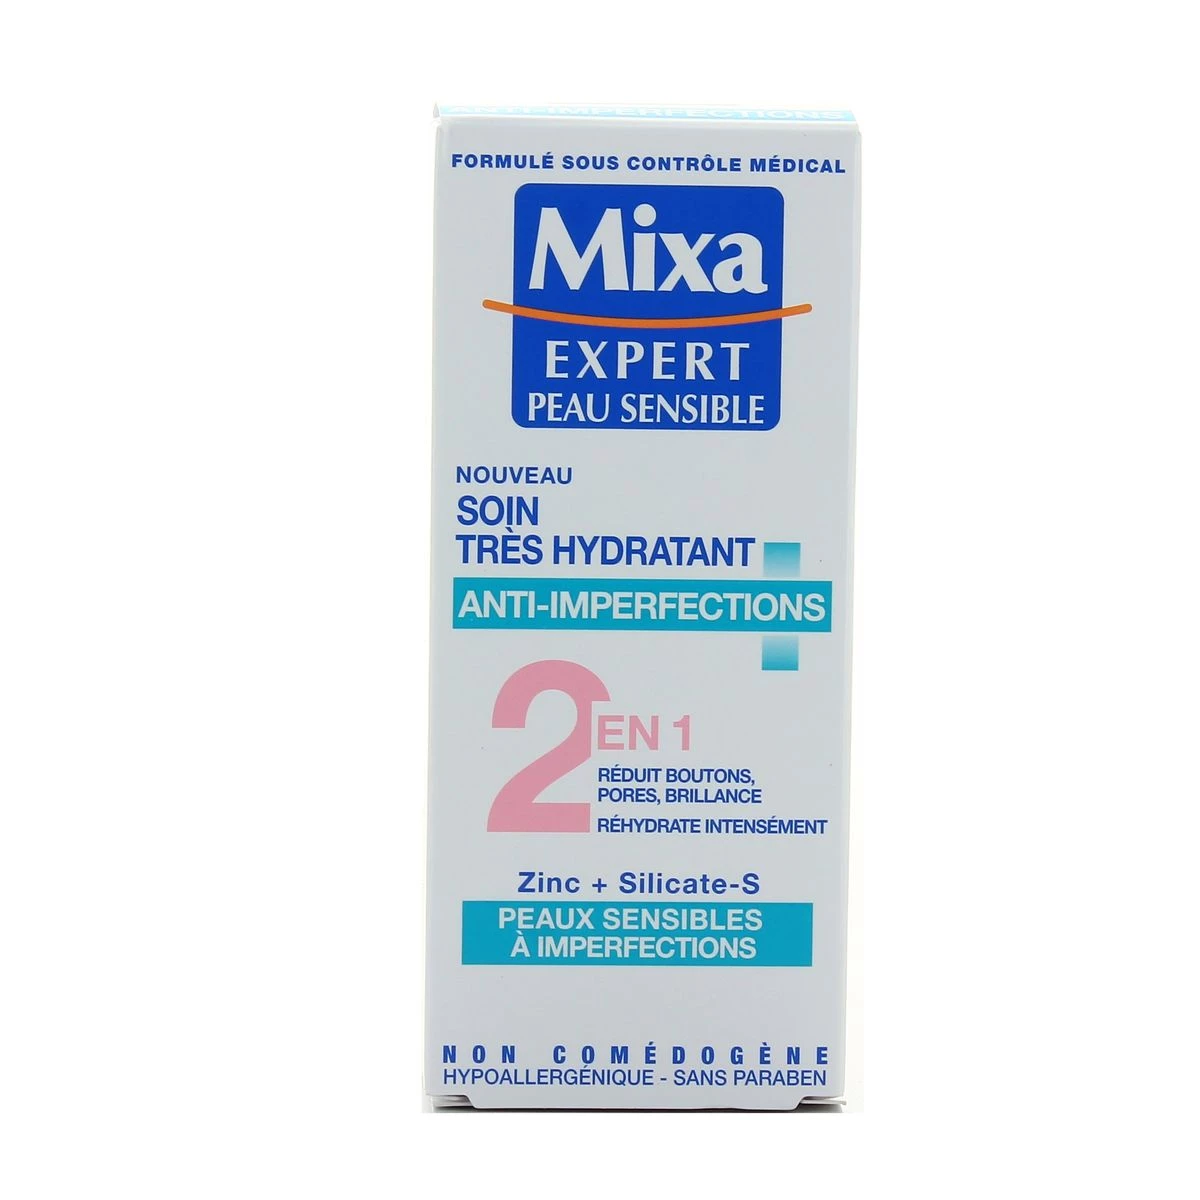 Very Moisturizing Anti-Imperfections Treatment 2 in 1 Sensitive Skin with Imperfections, 50ml - MIXA